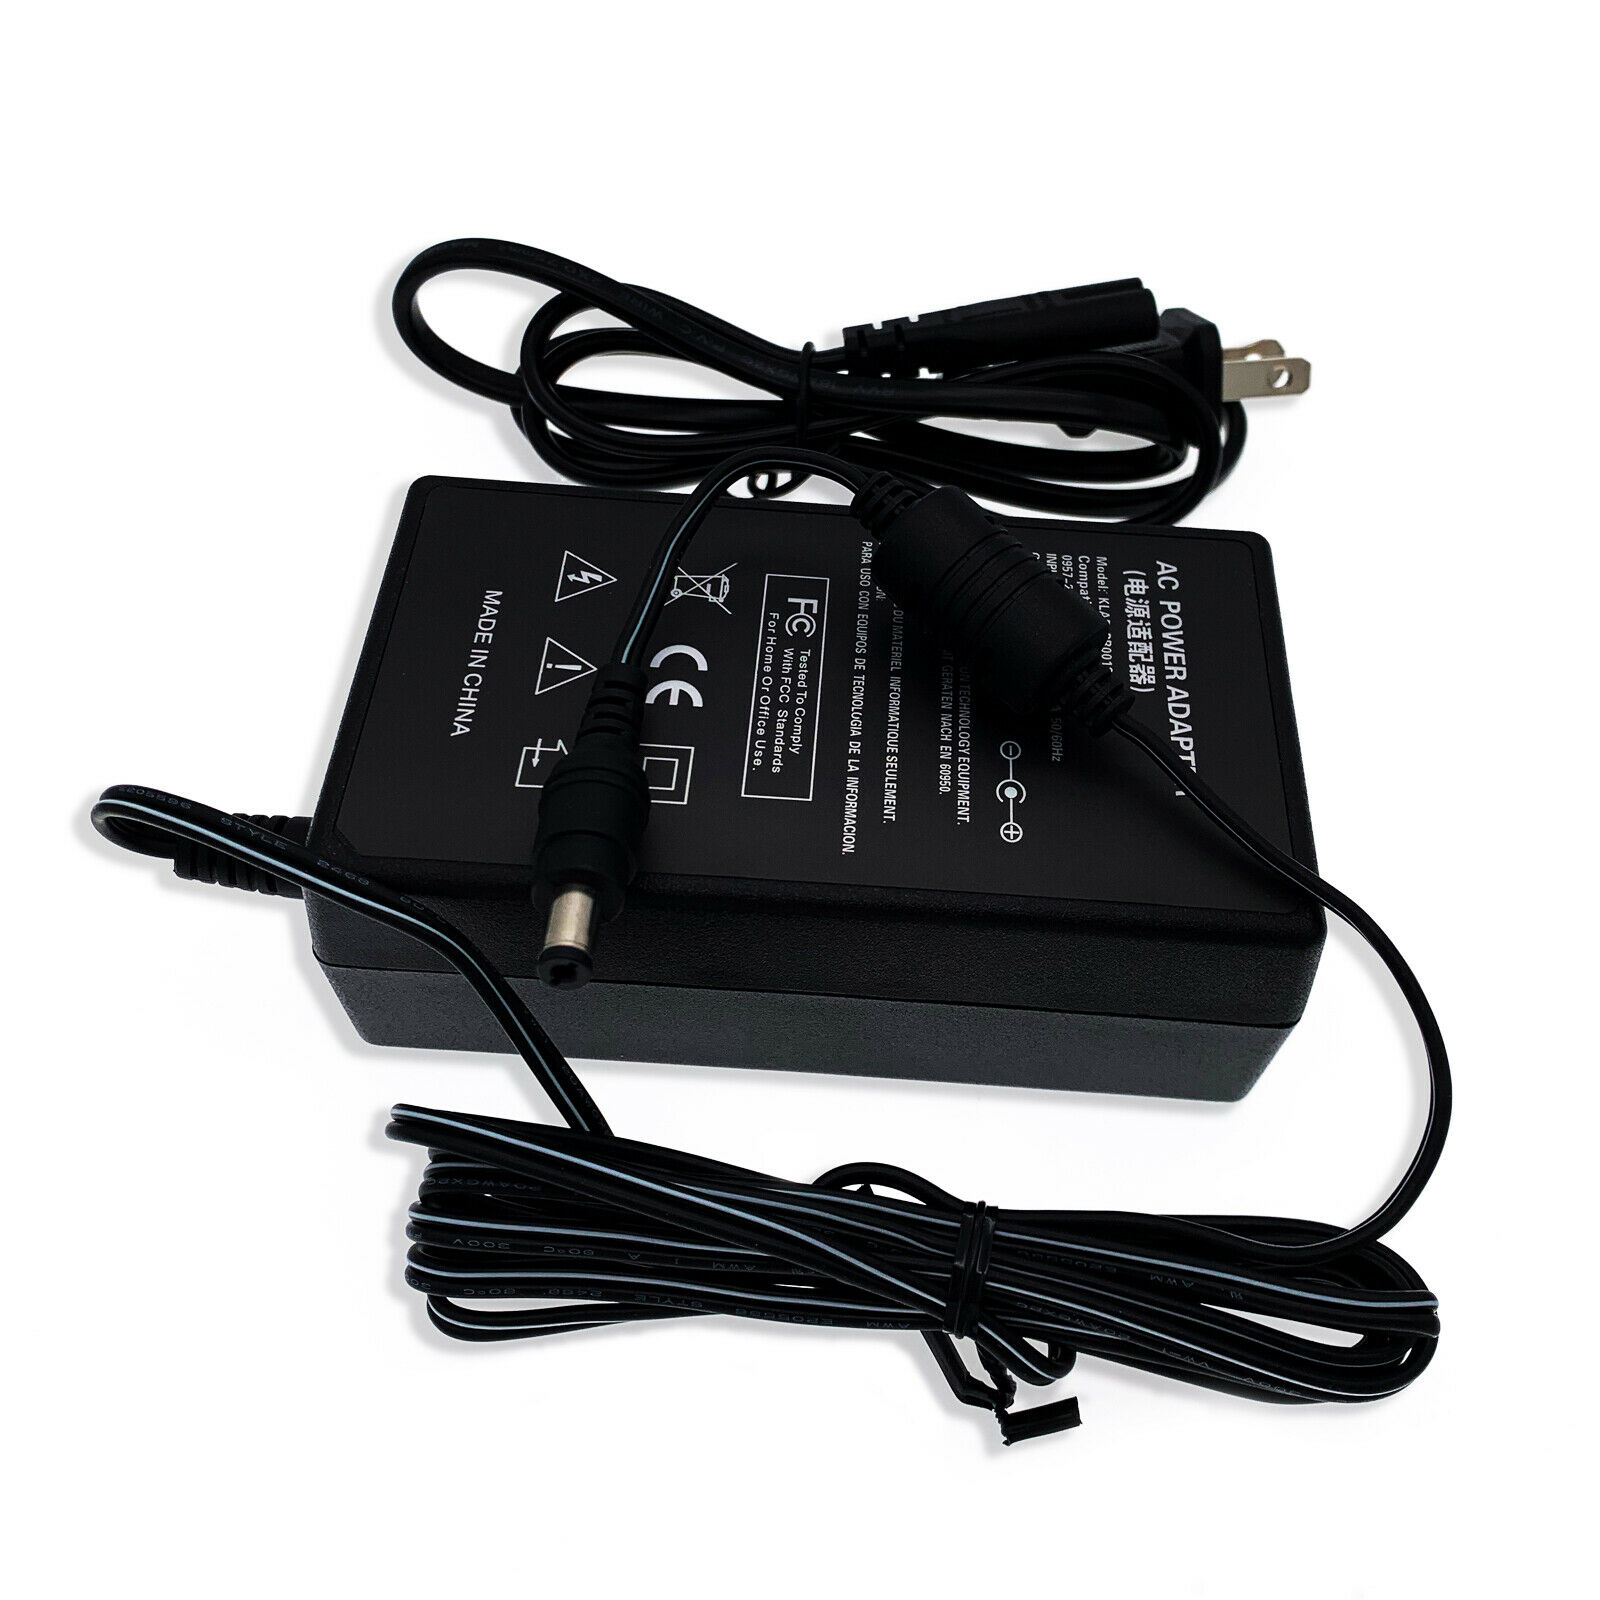 AC Adapter For HP Photosmart A612 A616 A617 A618 A626 A636 Printer Power Supply AC Adapter For HP Photosmart A612 A616 - Click Image to Close